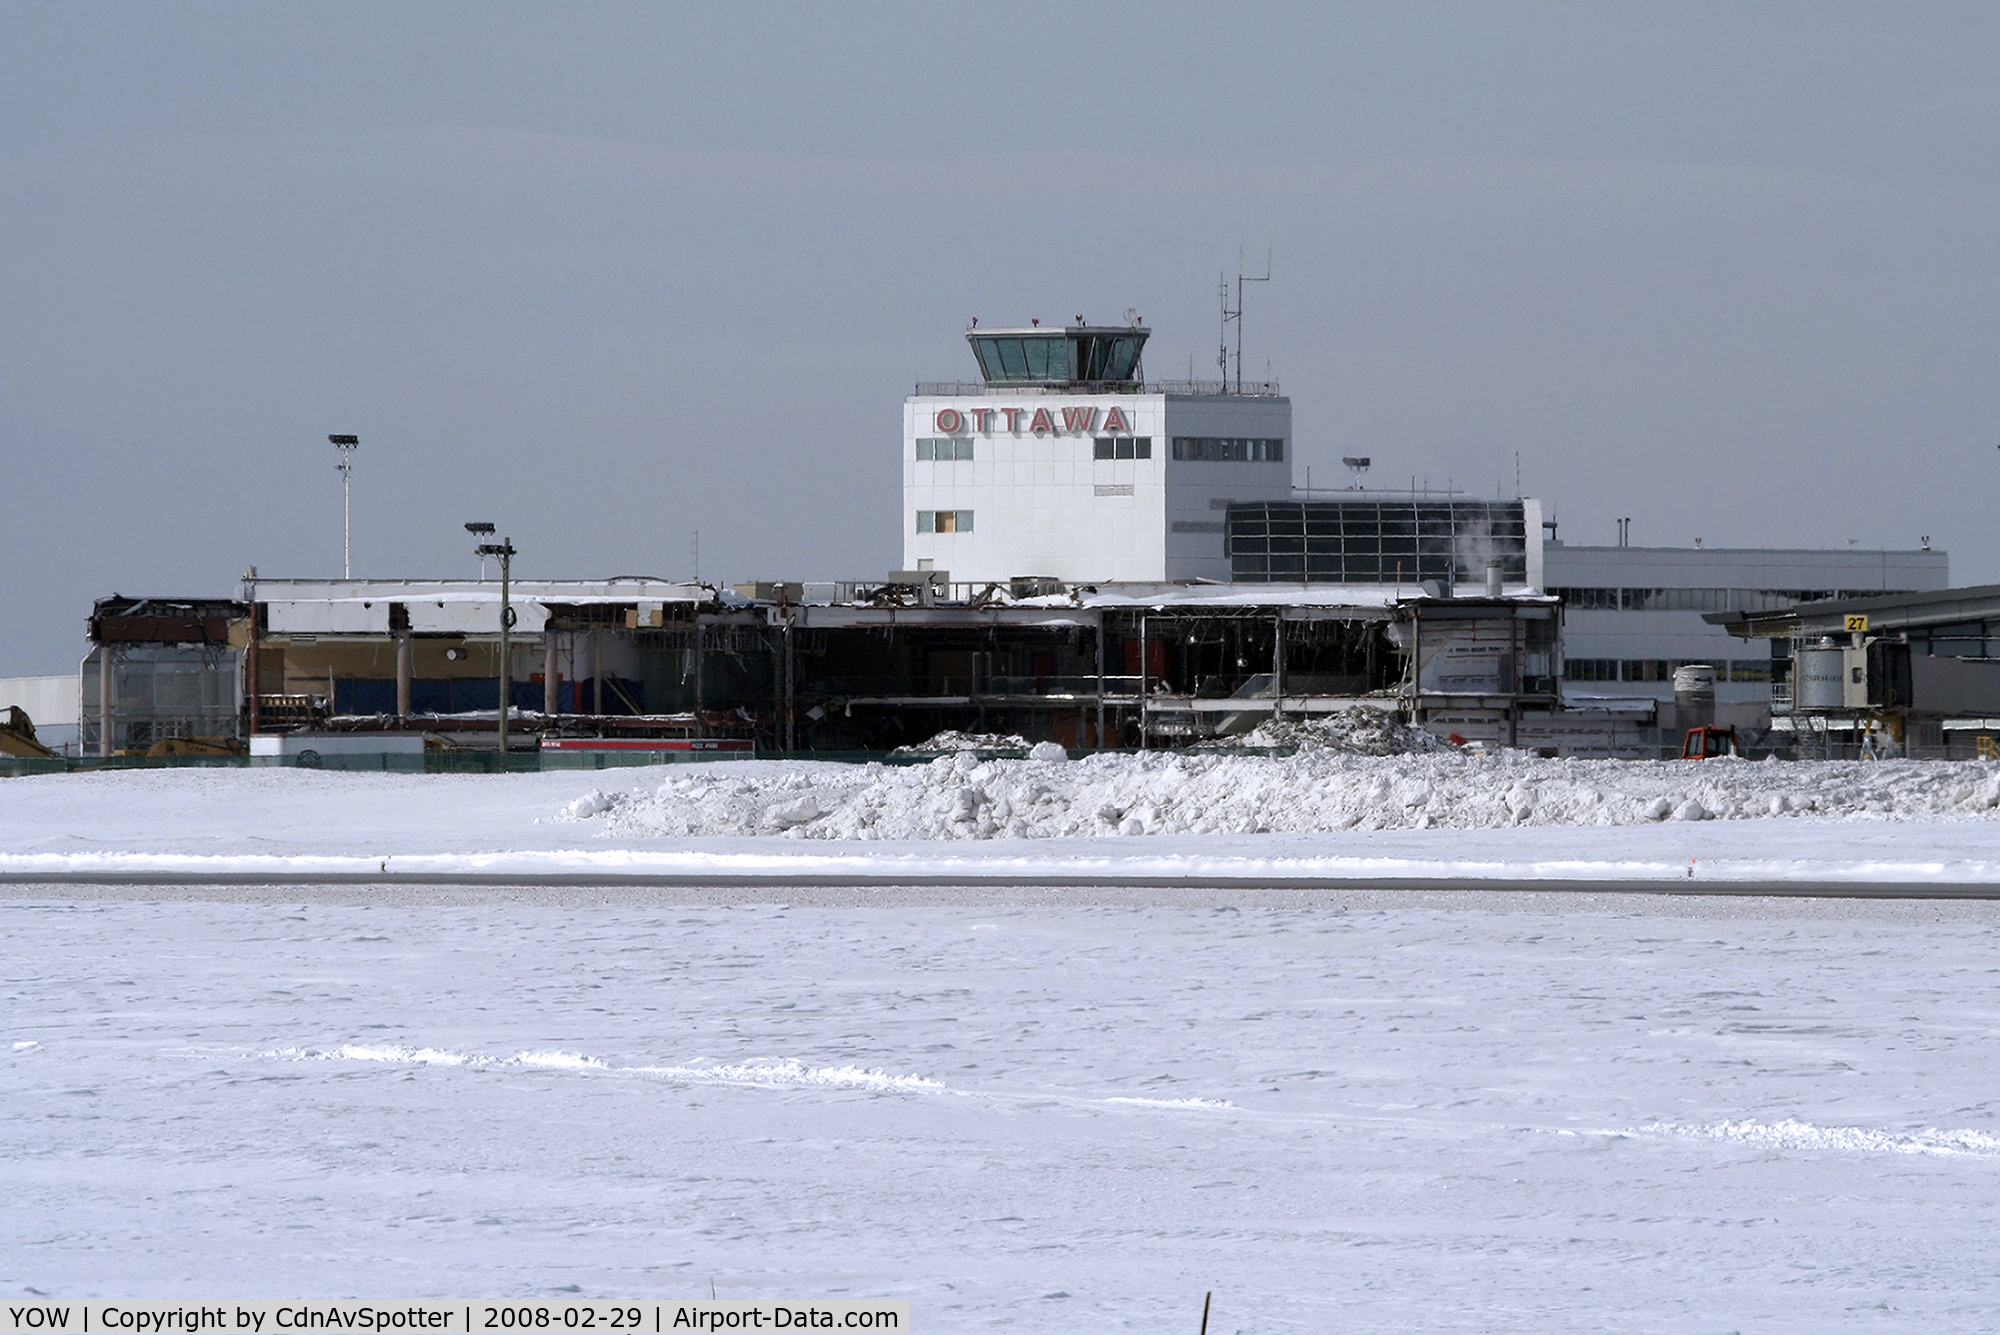 Ottawa Macdonald-Cartier International Airport (Macdonald-Cartier International Airport), Ottawa, Ontario Canada (YOW) - YOW - The old Airport Terminal being demolished to make way for new ramps on the newly completed terminal Phase 2